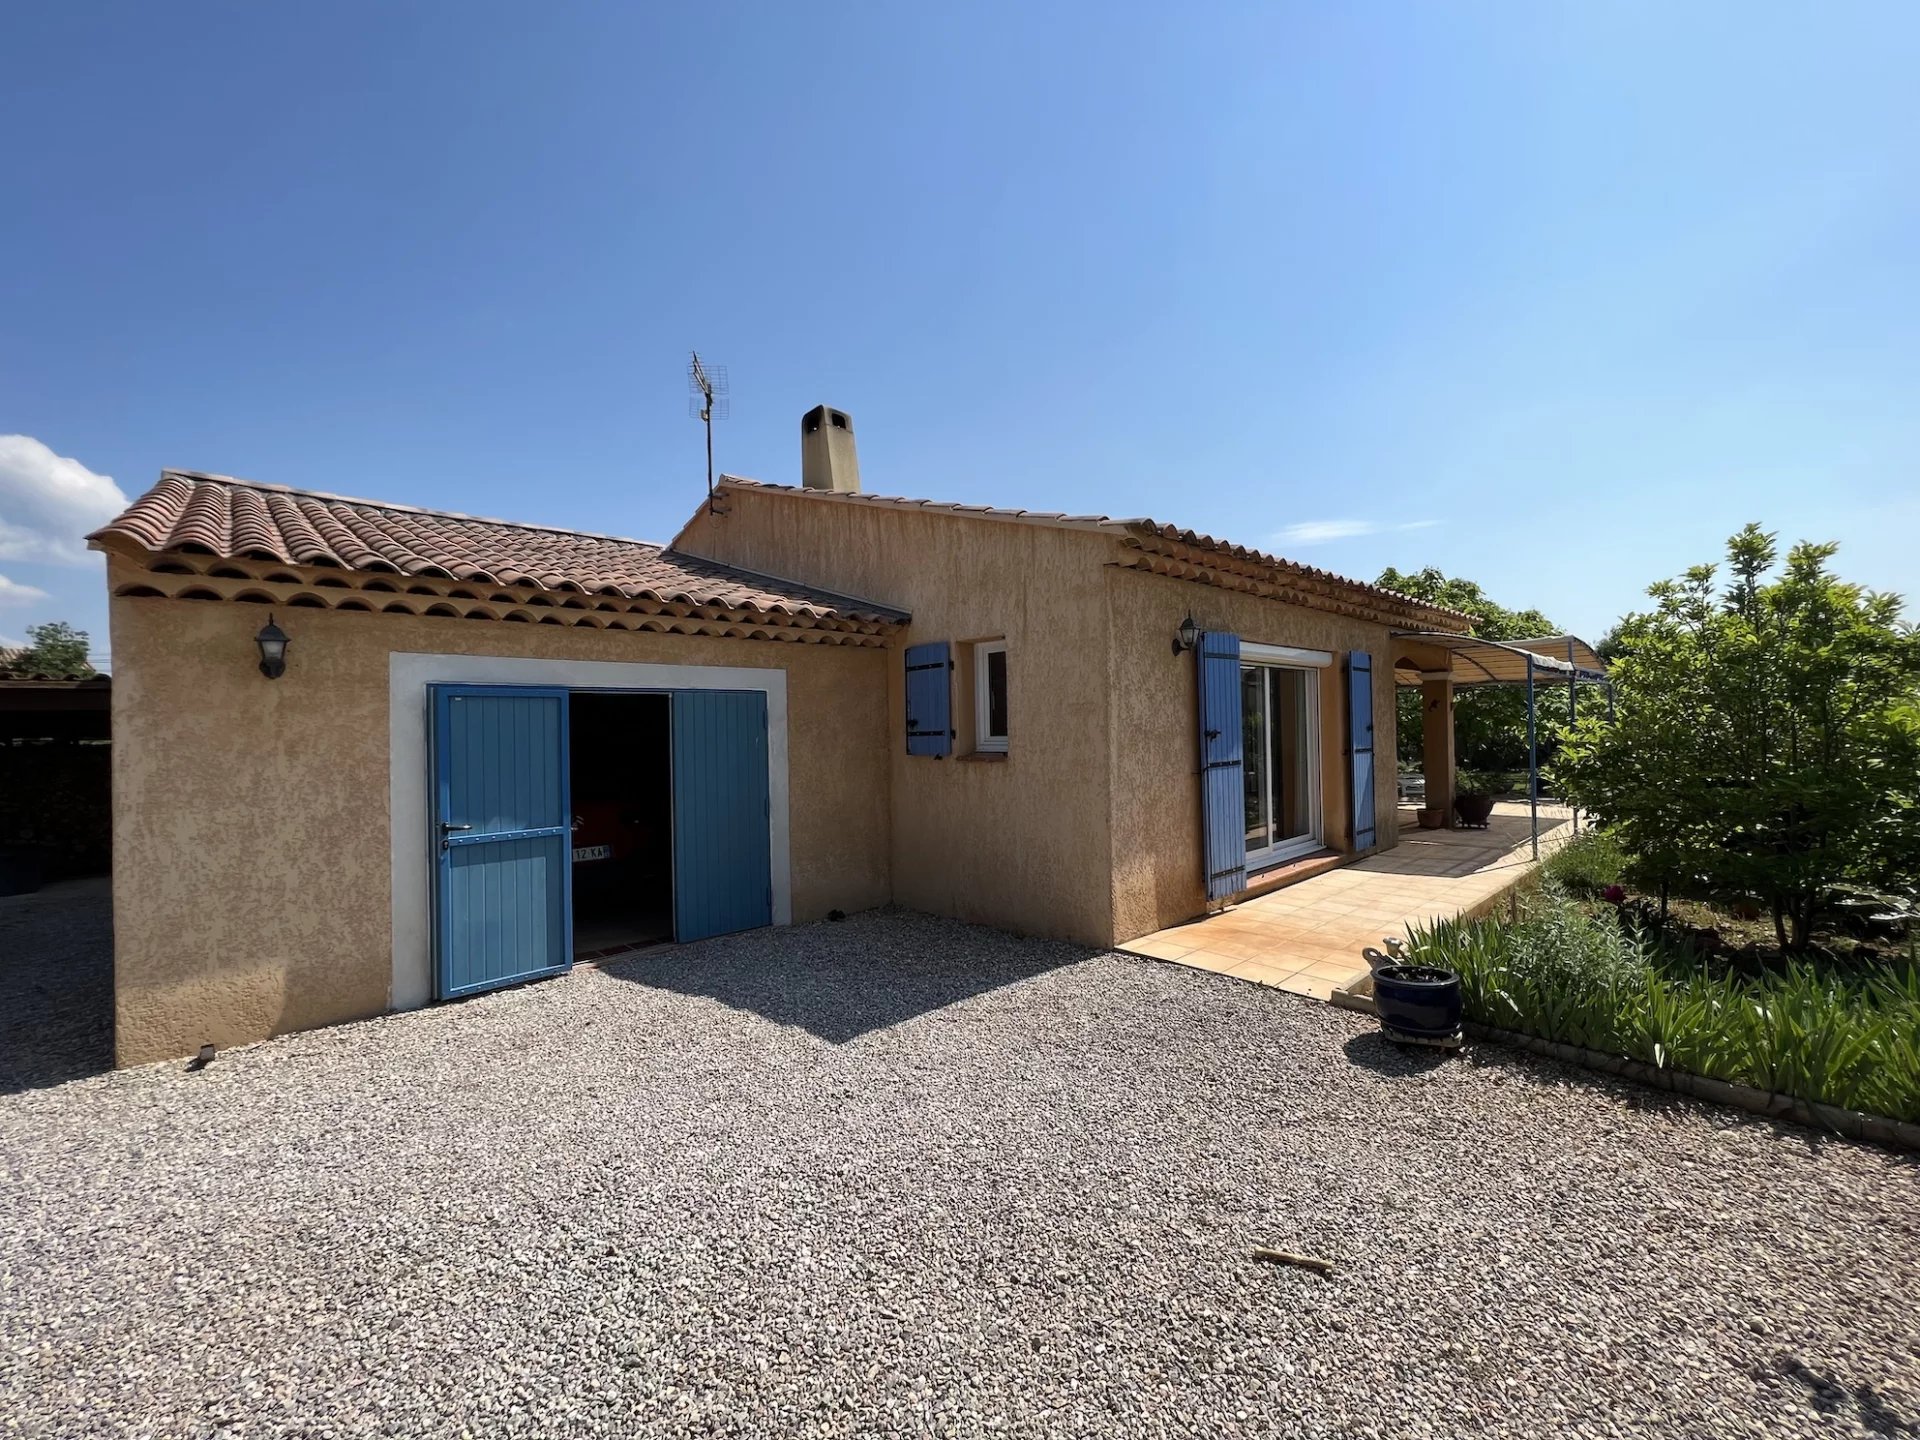 HOUSE - 10 MINUTES FROM COTIGNAC